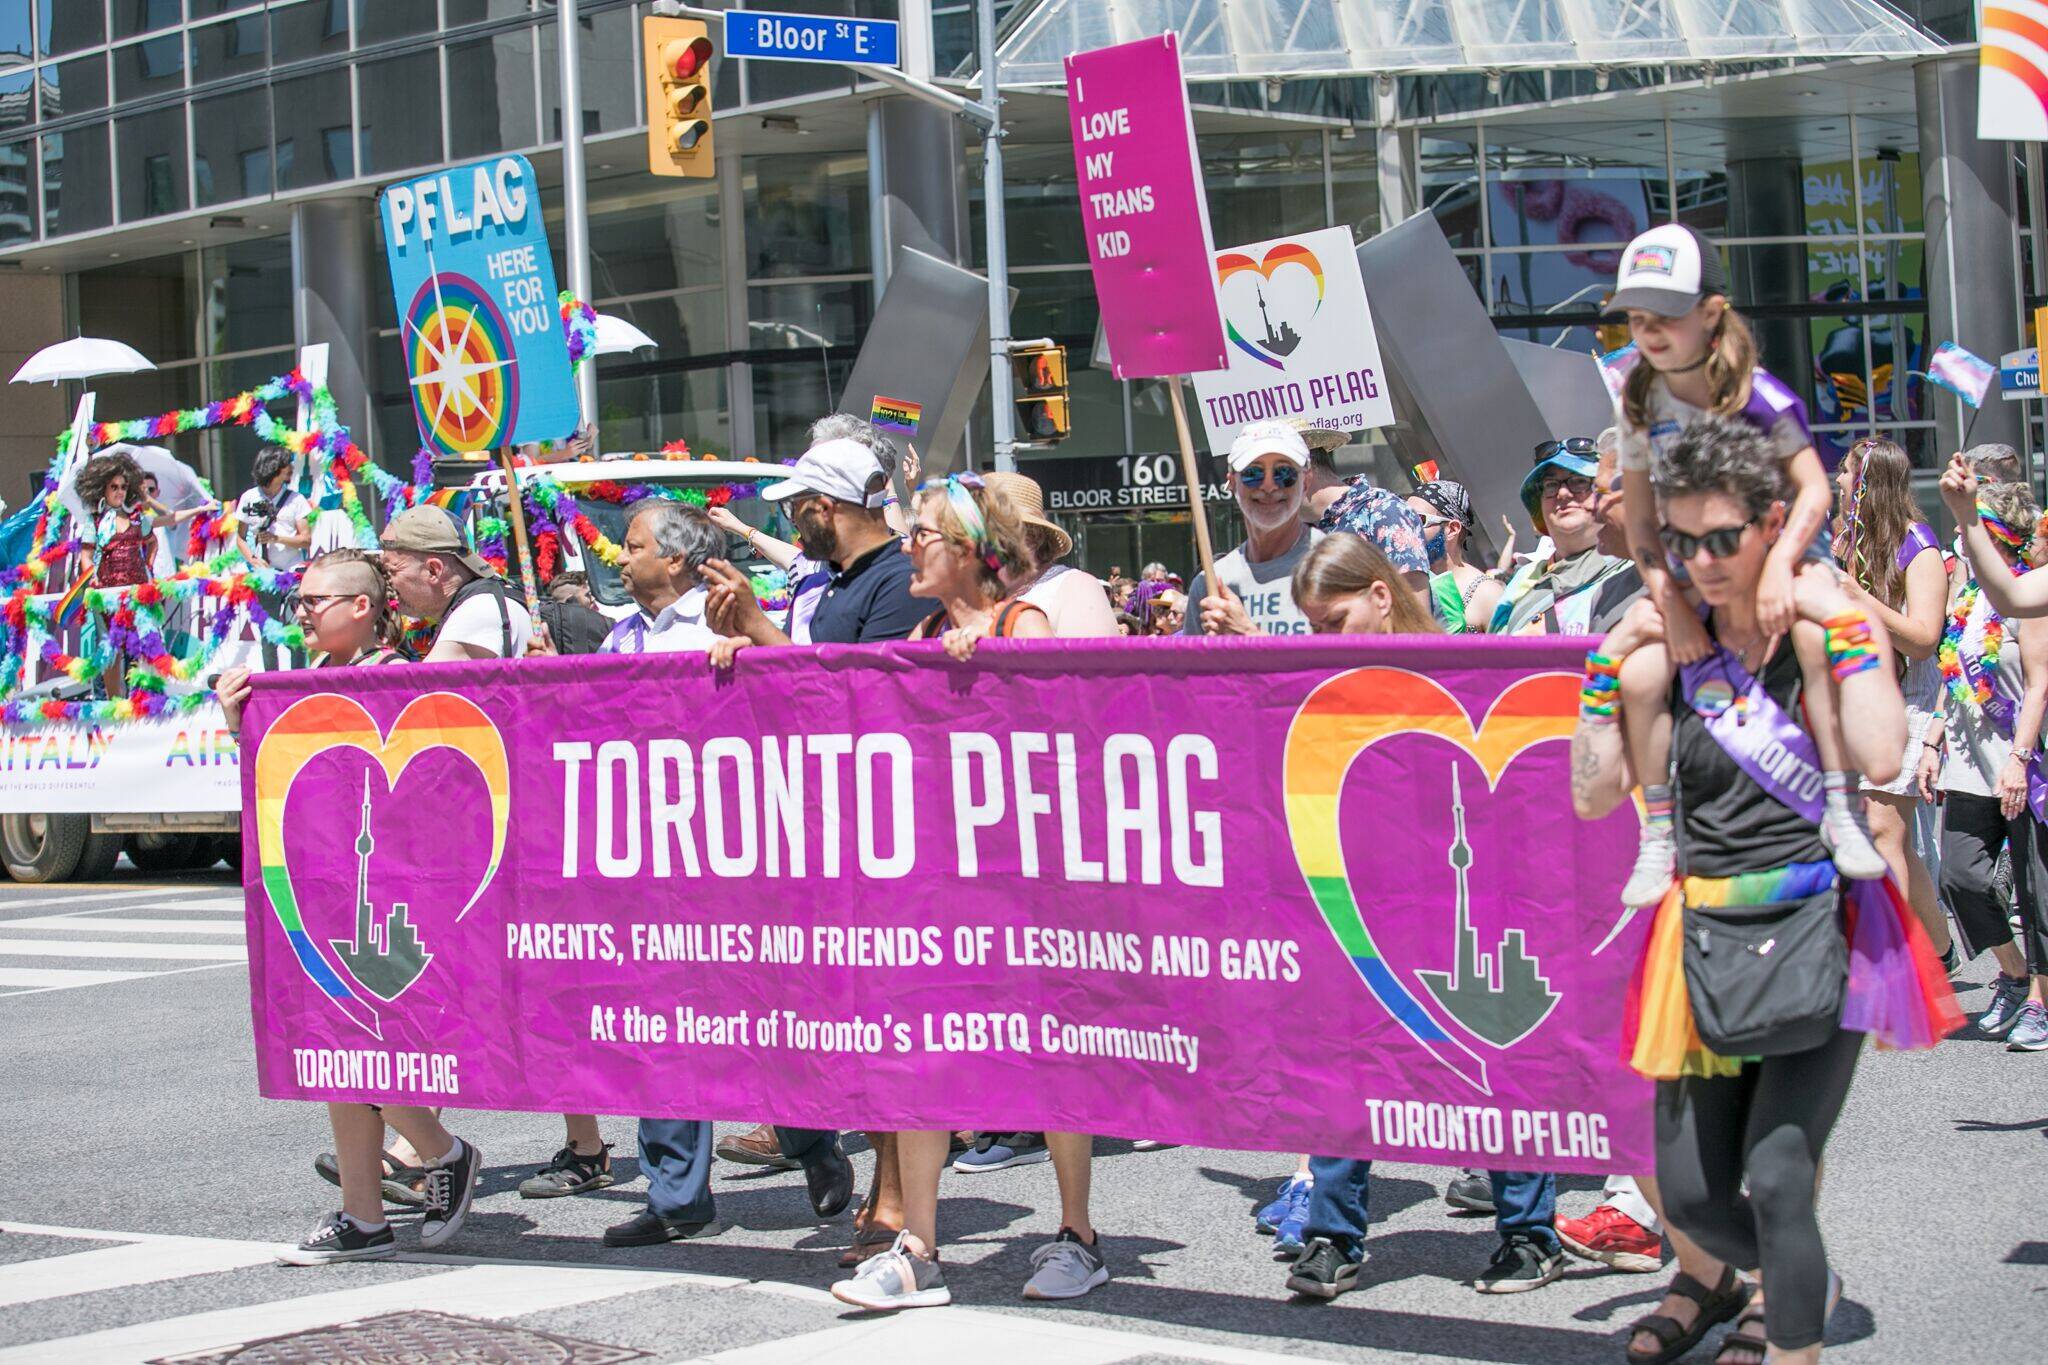 The Toronto Pride Parade is going virtual this year